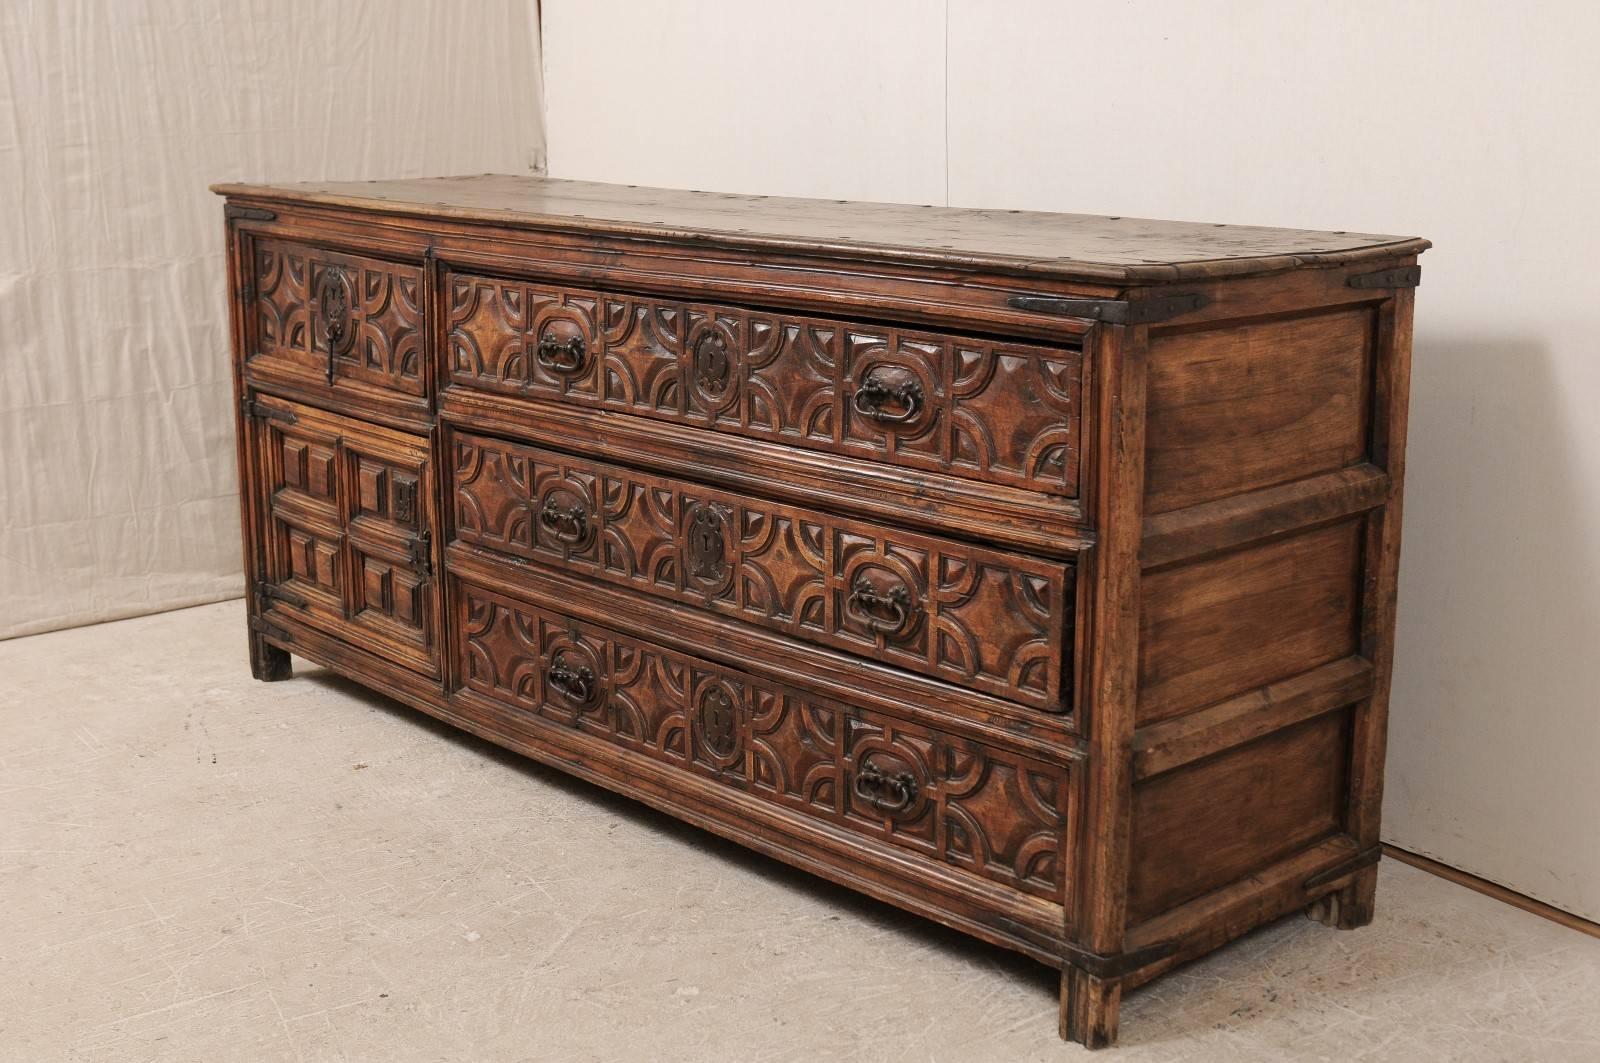 18th Century and Earlier Exquisite 18th Century Spanish Sacristy Chest with Carved Wood Detailed Pattern